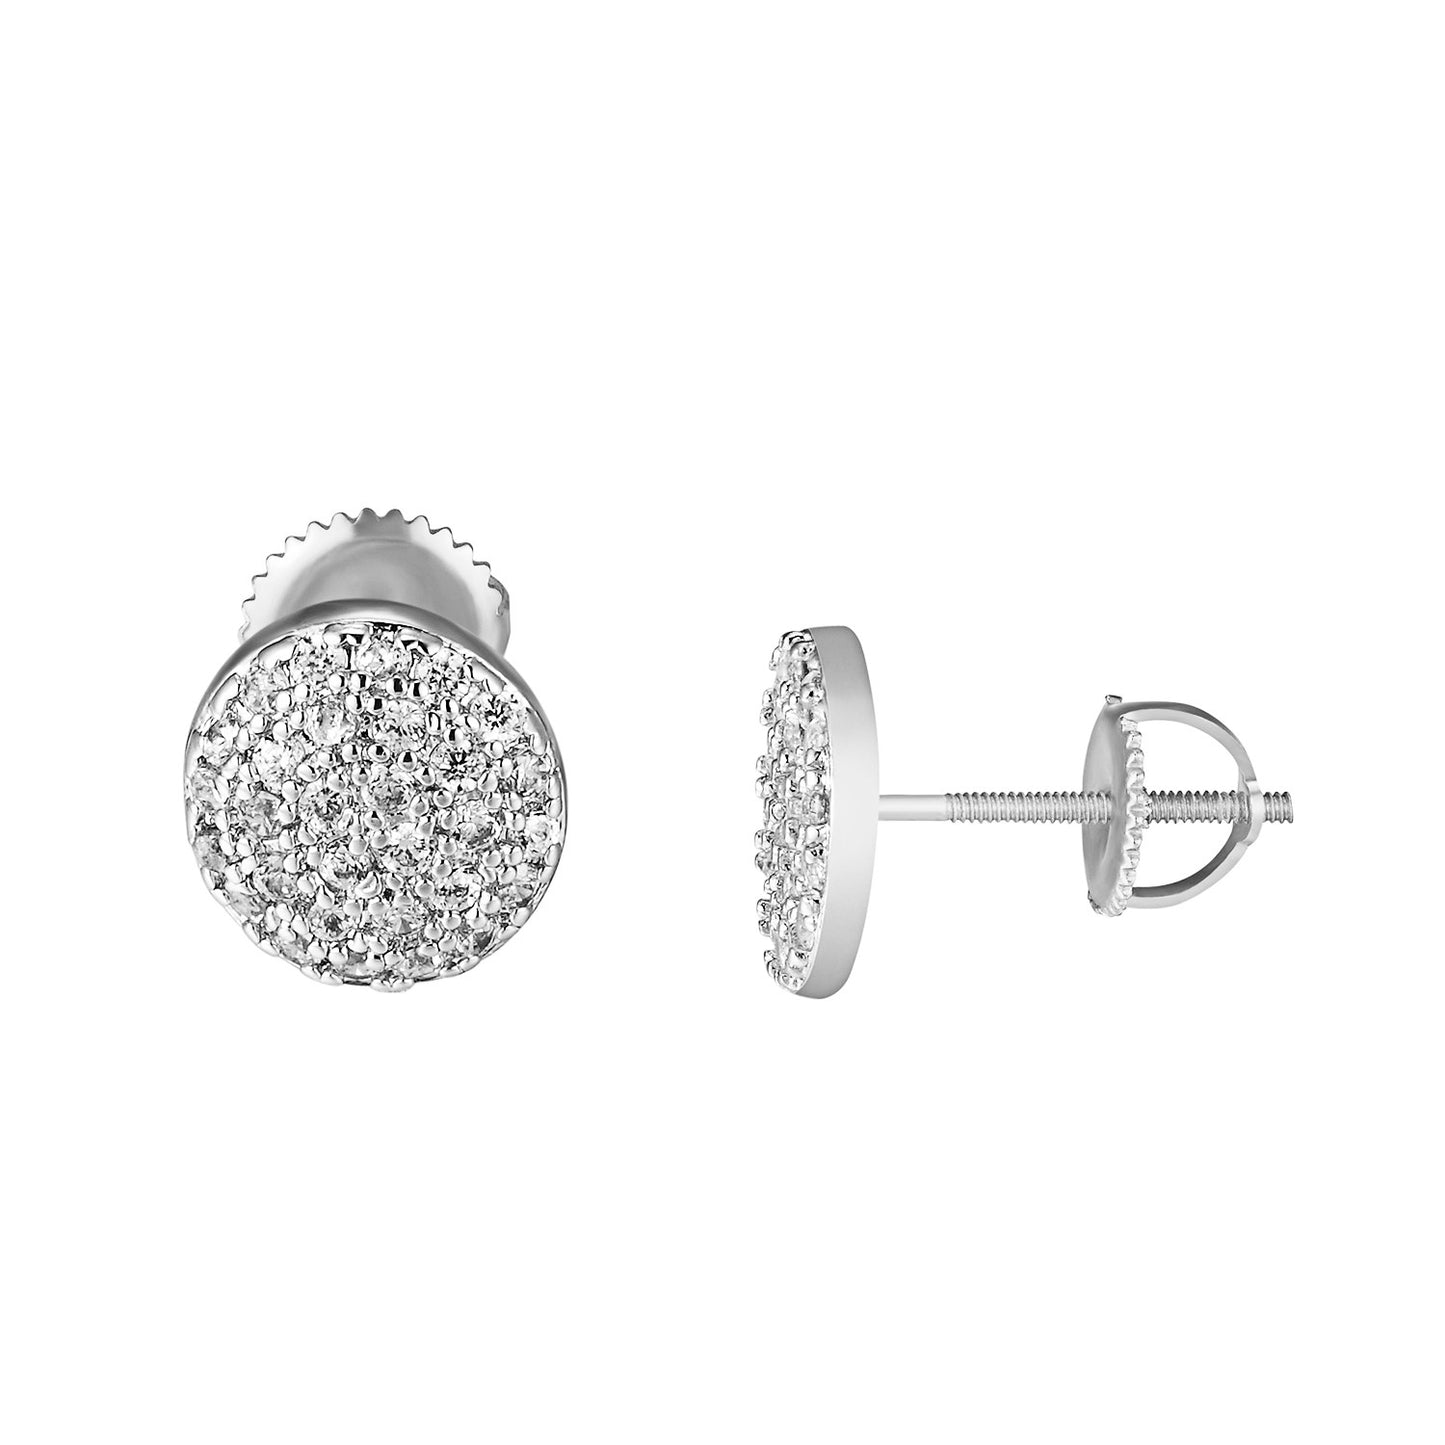 Cluster Set Round Shape Earrings Silver Tone Simulated Diamonds 7mm Studs Classy